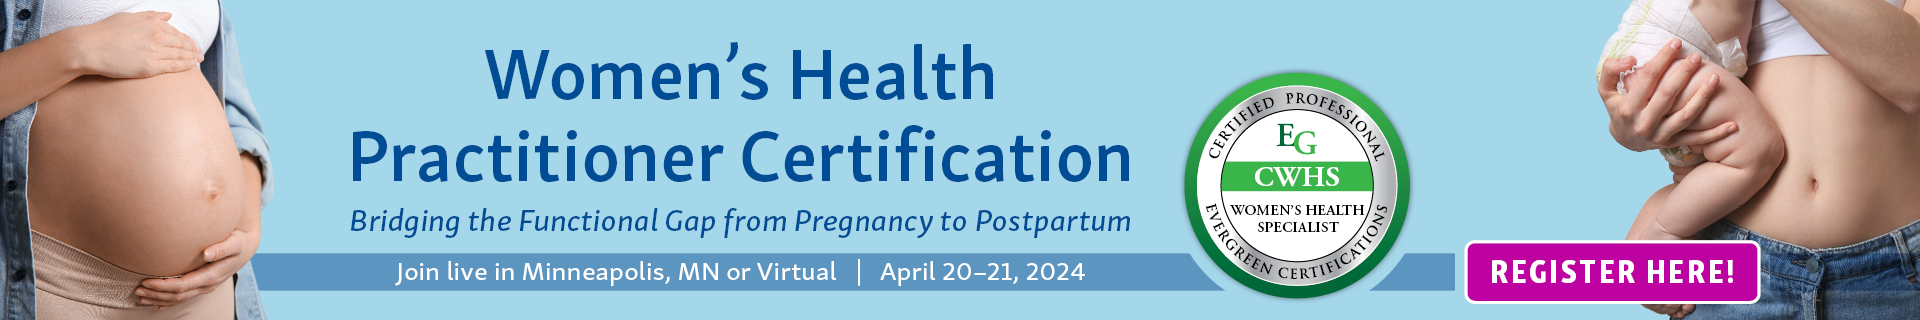 Women's Health Practitioner Certification: Bridging the Functional Gap from Pregnancy to Postpartum